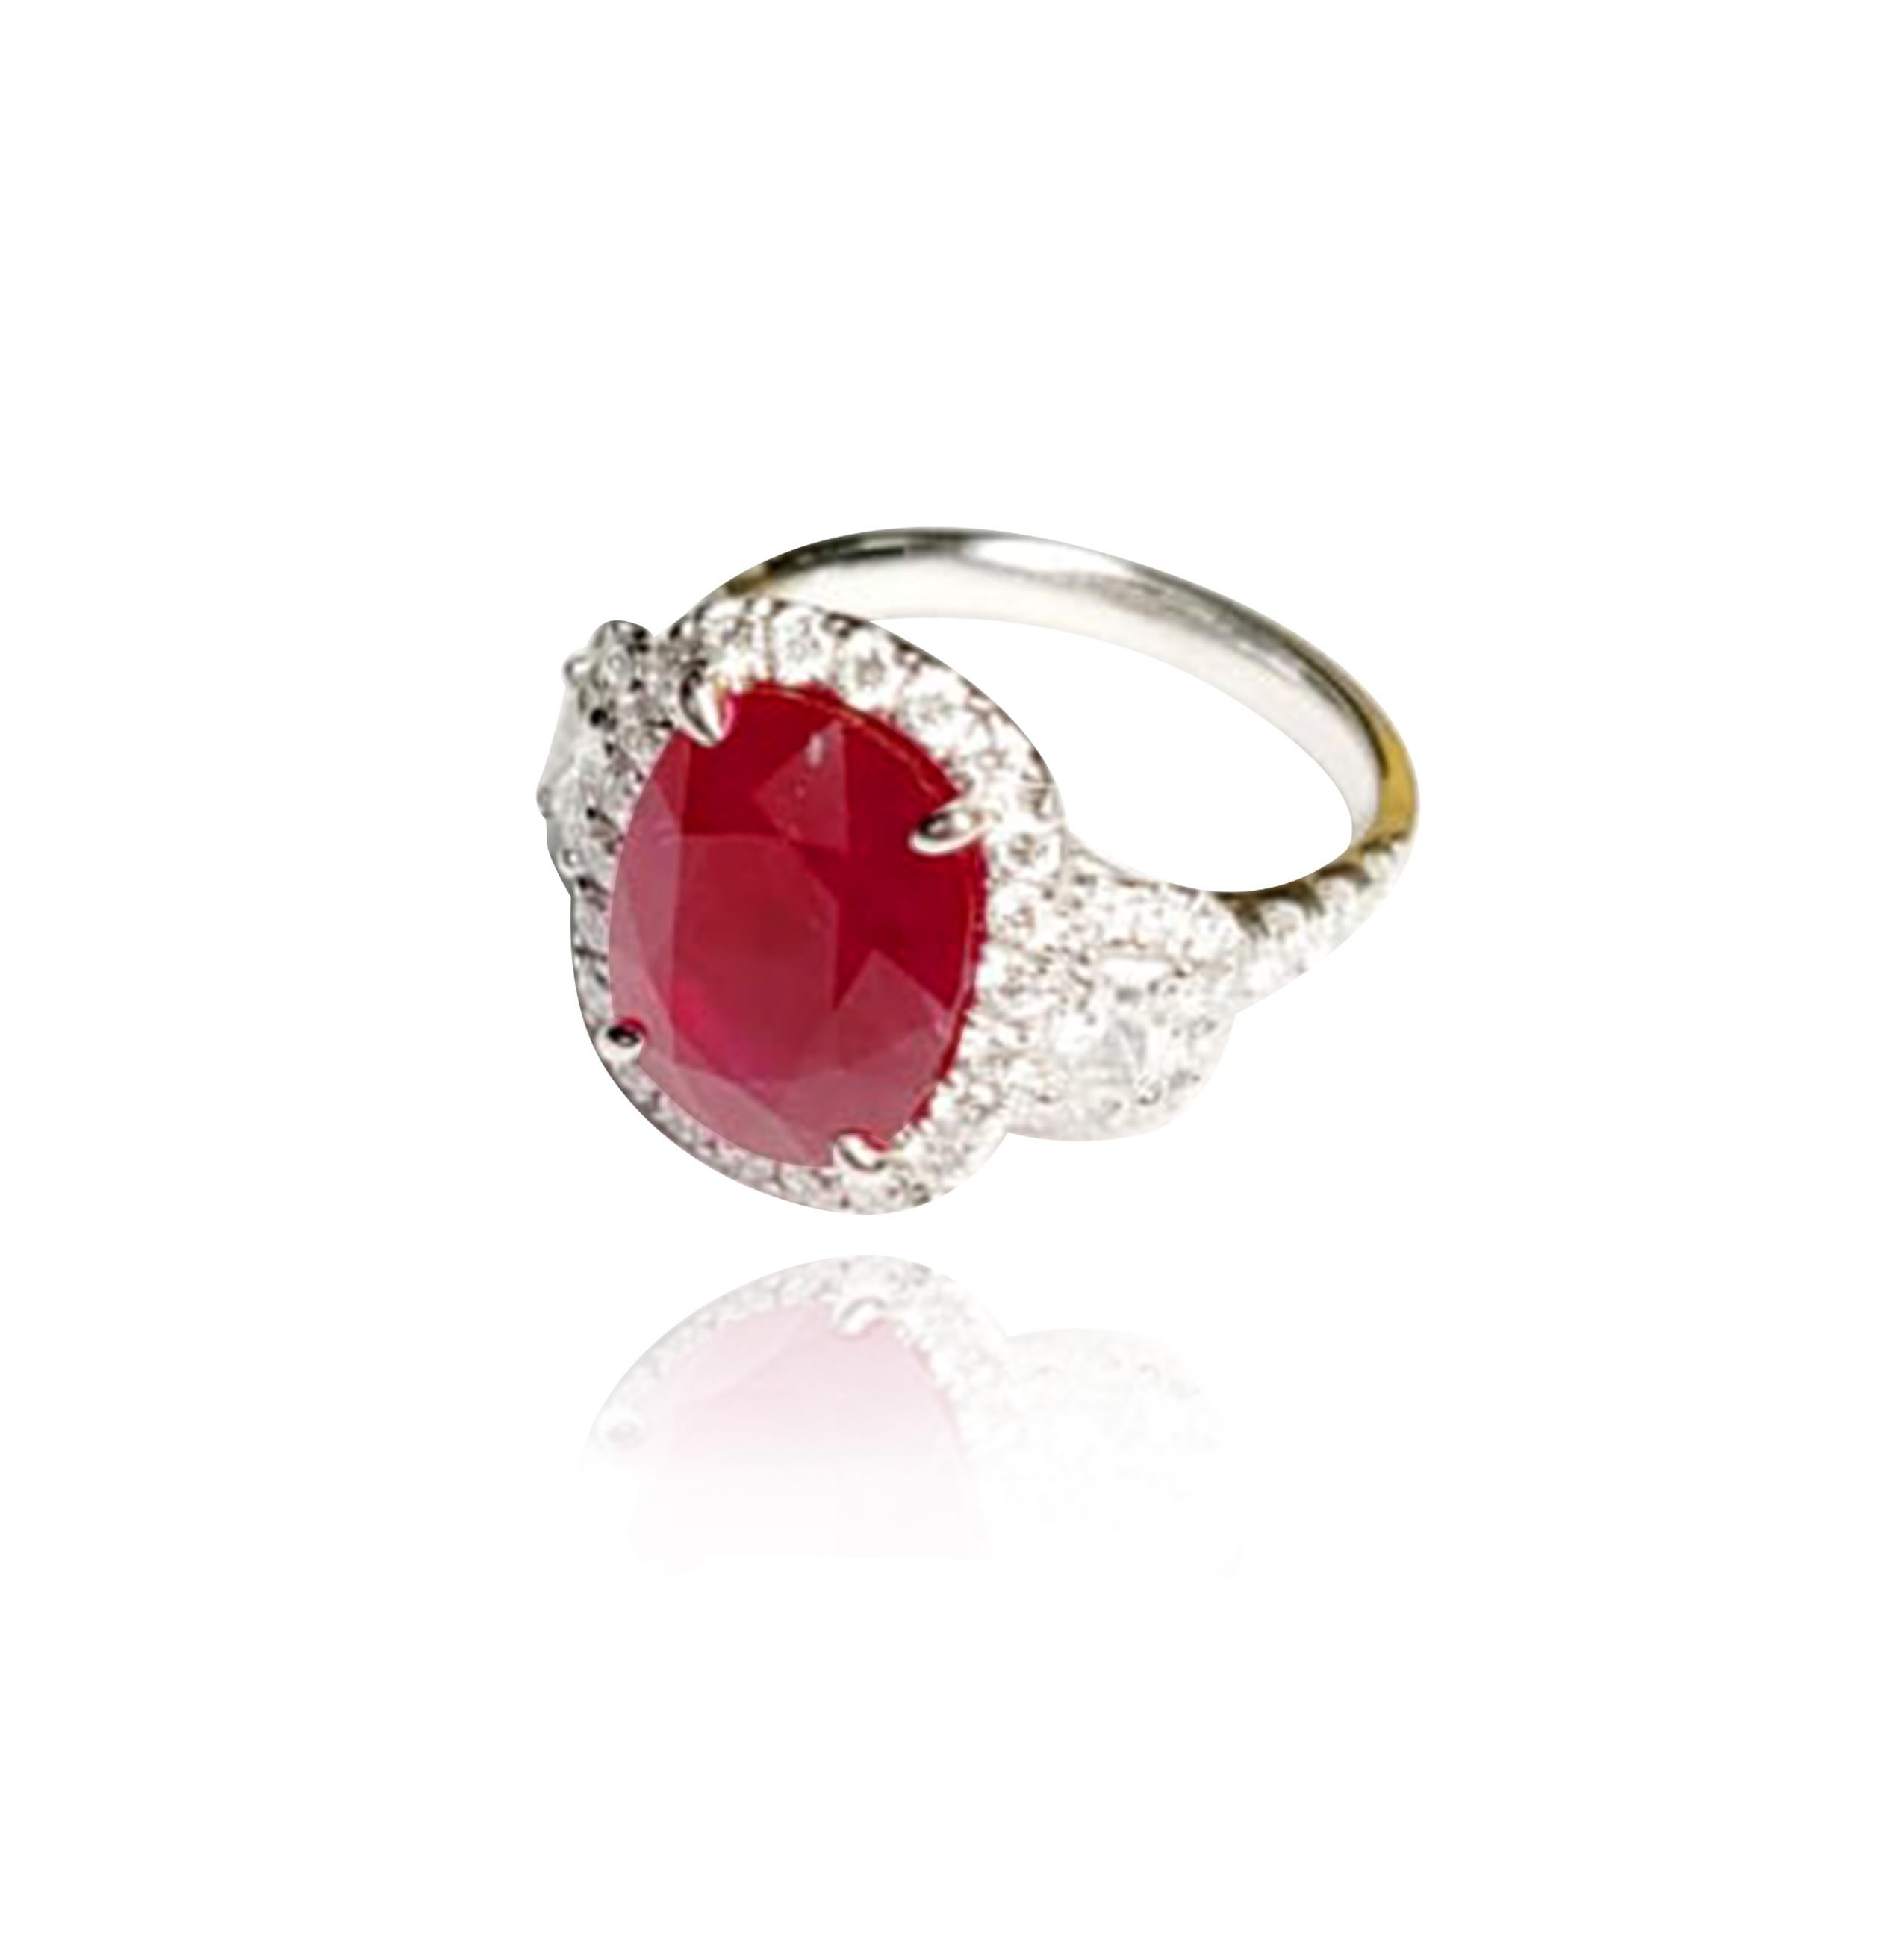 Oval Cut Ruby (5.63ct, 12.6 x 9.7mm)

Two White Diamonds (1.40ct)

Ring Metal (18k White Gold)

GIA Certified: Yes


